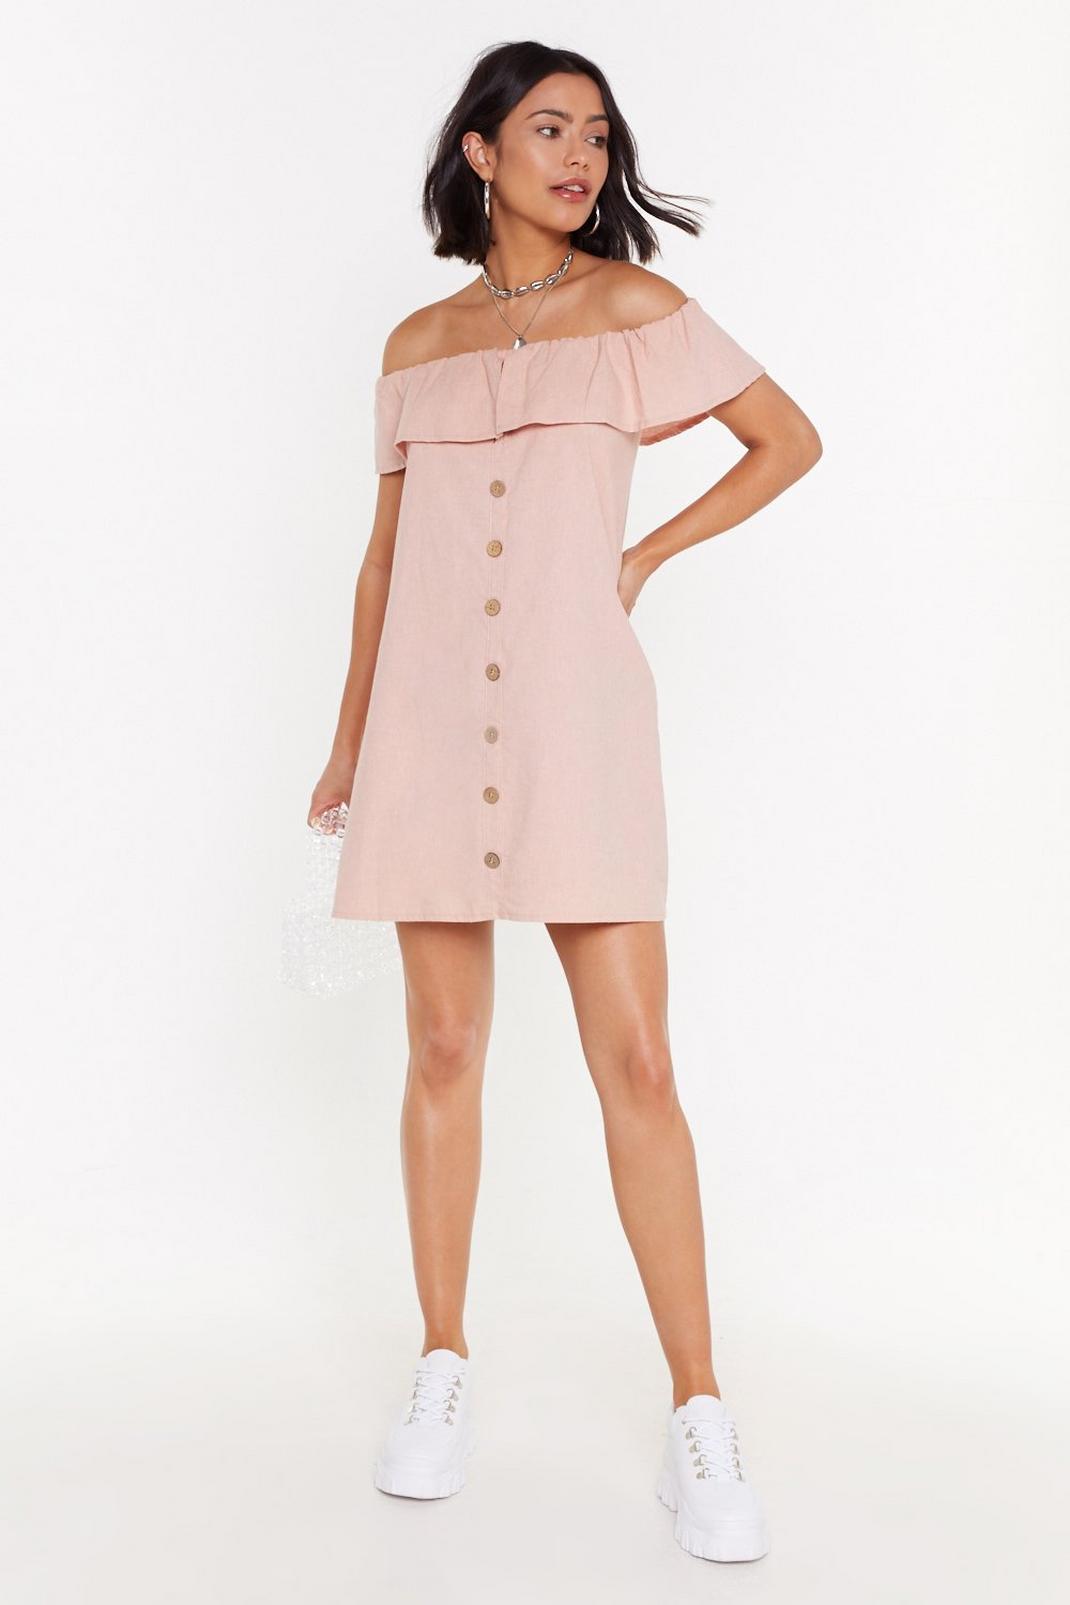 Peach Haters Back Off-the-Shoulder Mini Dress image number 1